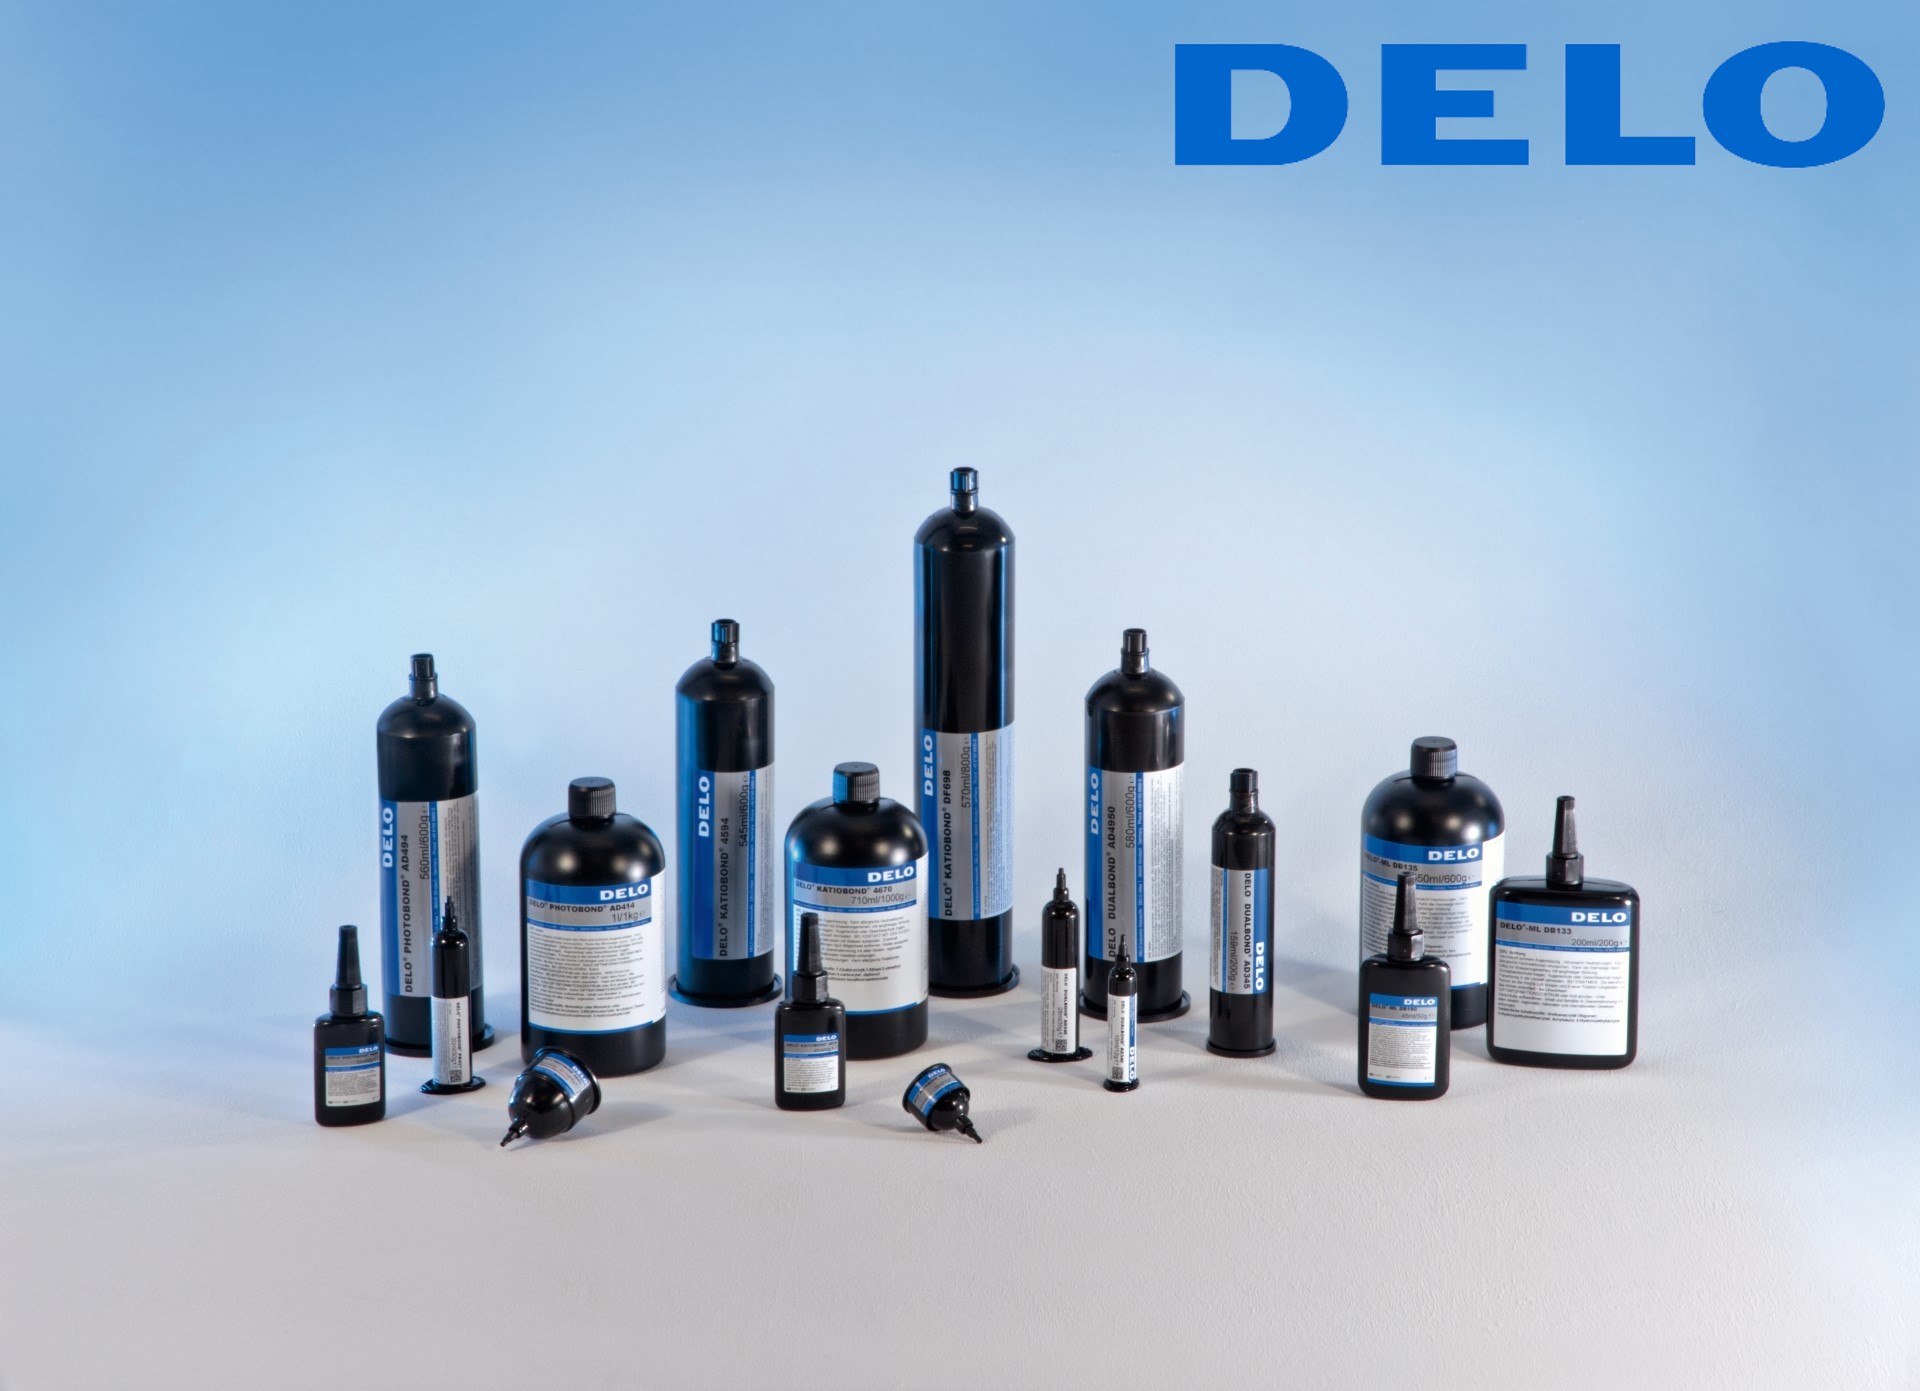 DELO_adhesive-containers